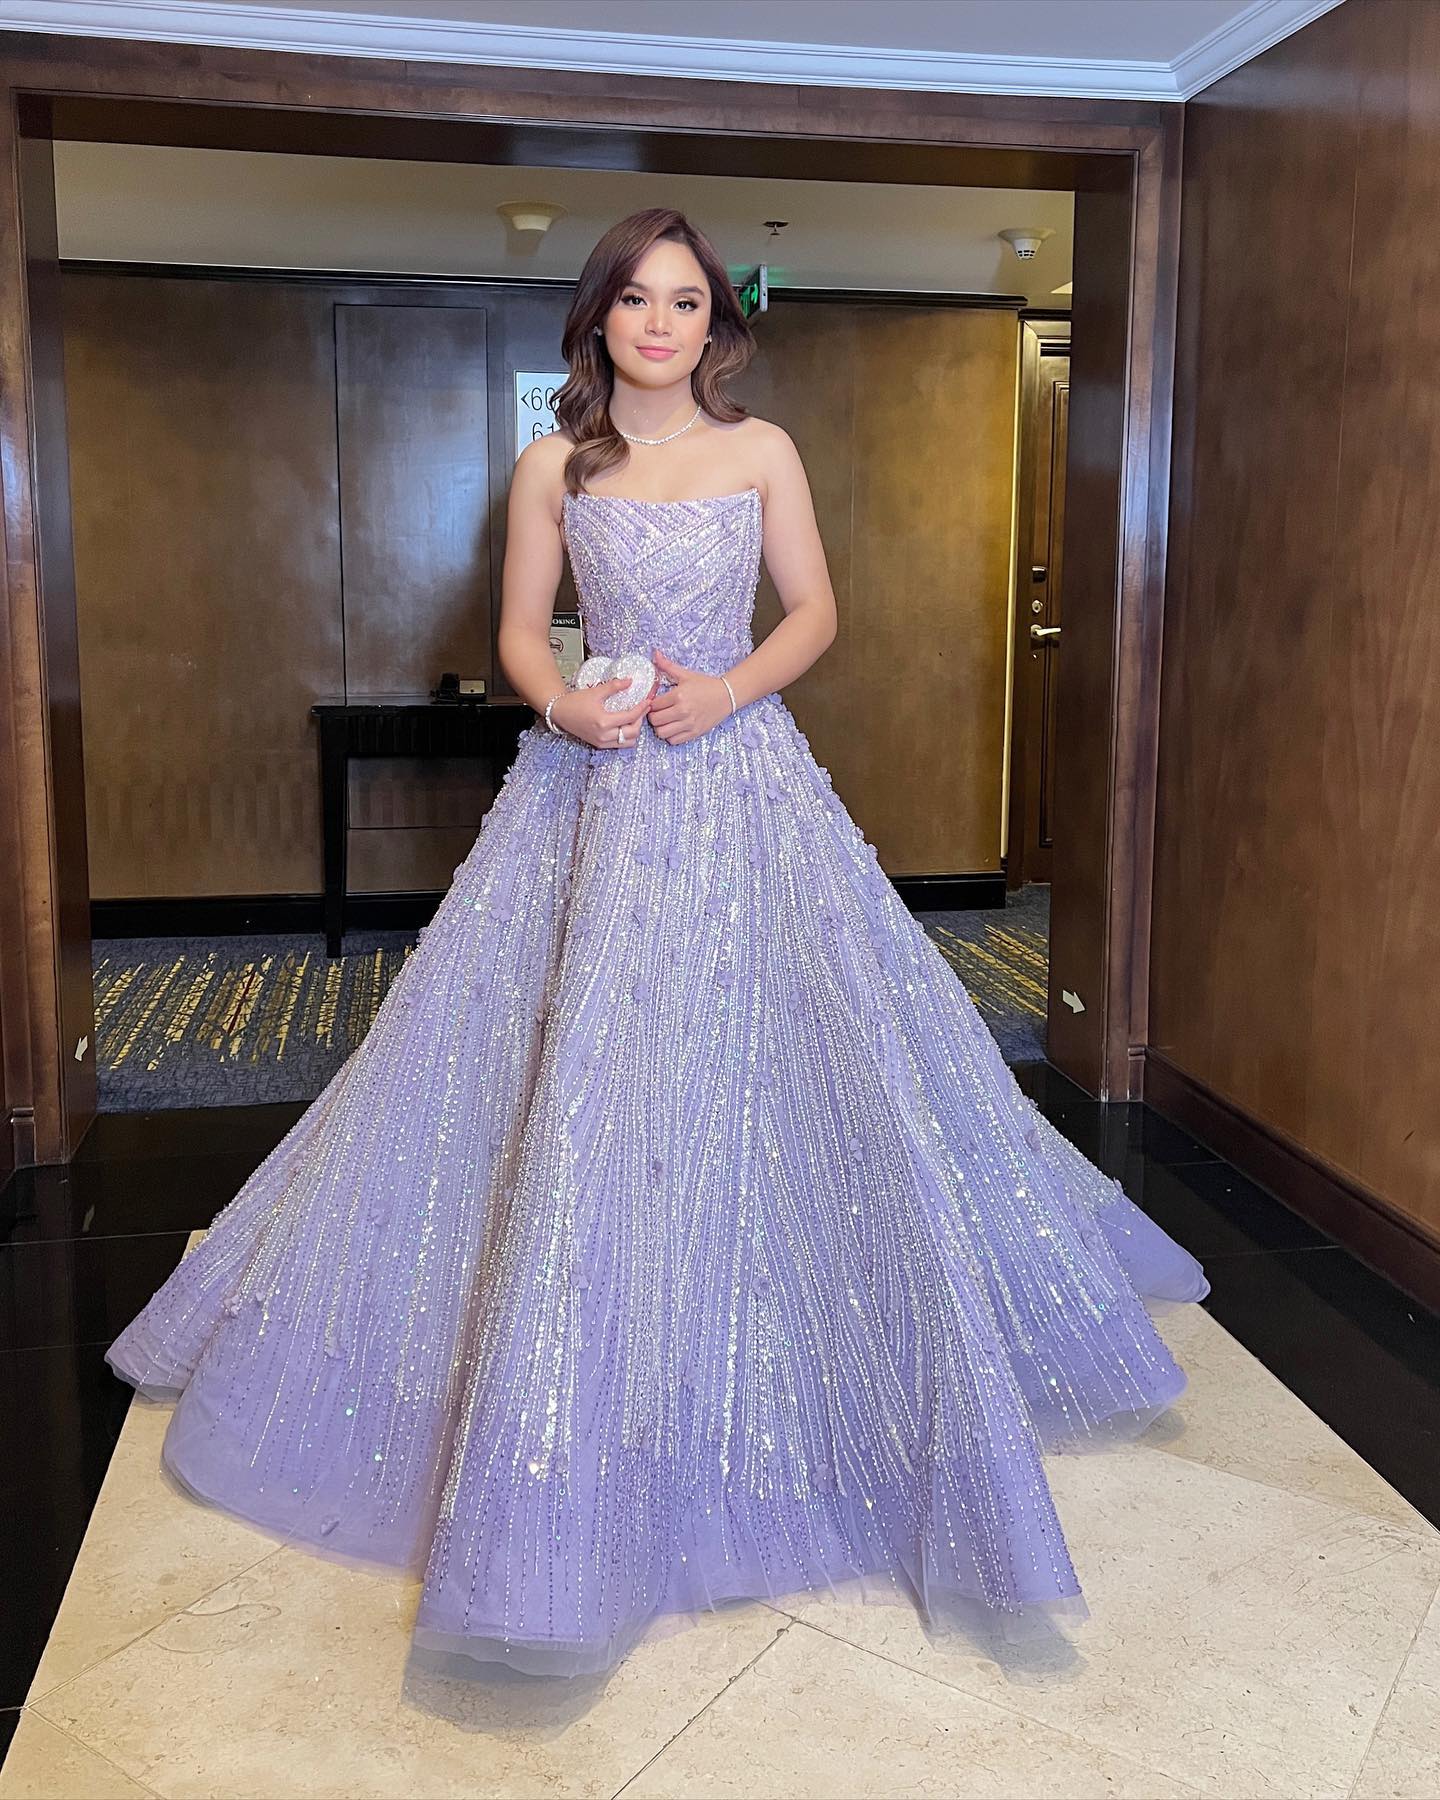 LOOK: Mary Pacquiao Wears Michael Leyva Ball Gown To Prom | Preview.ph